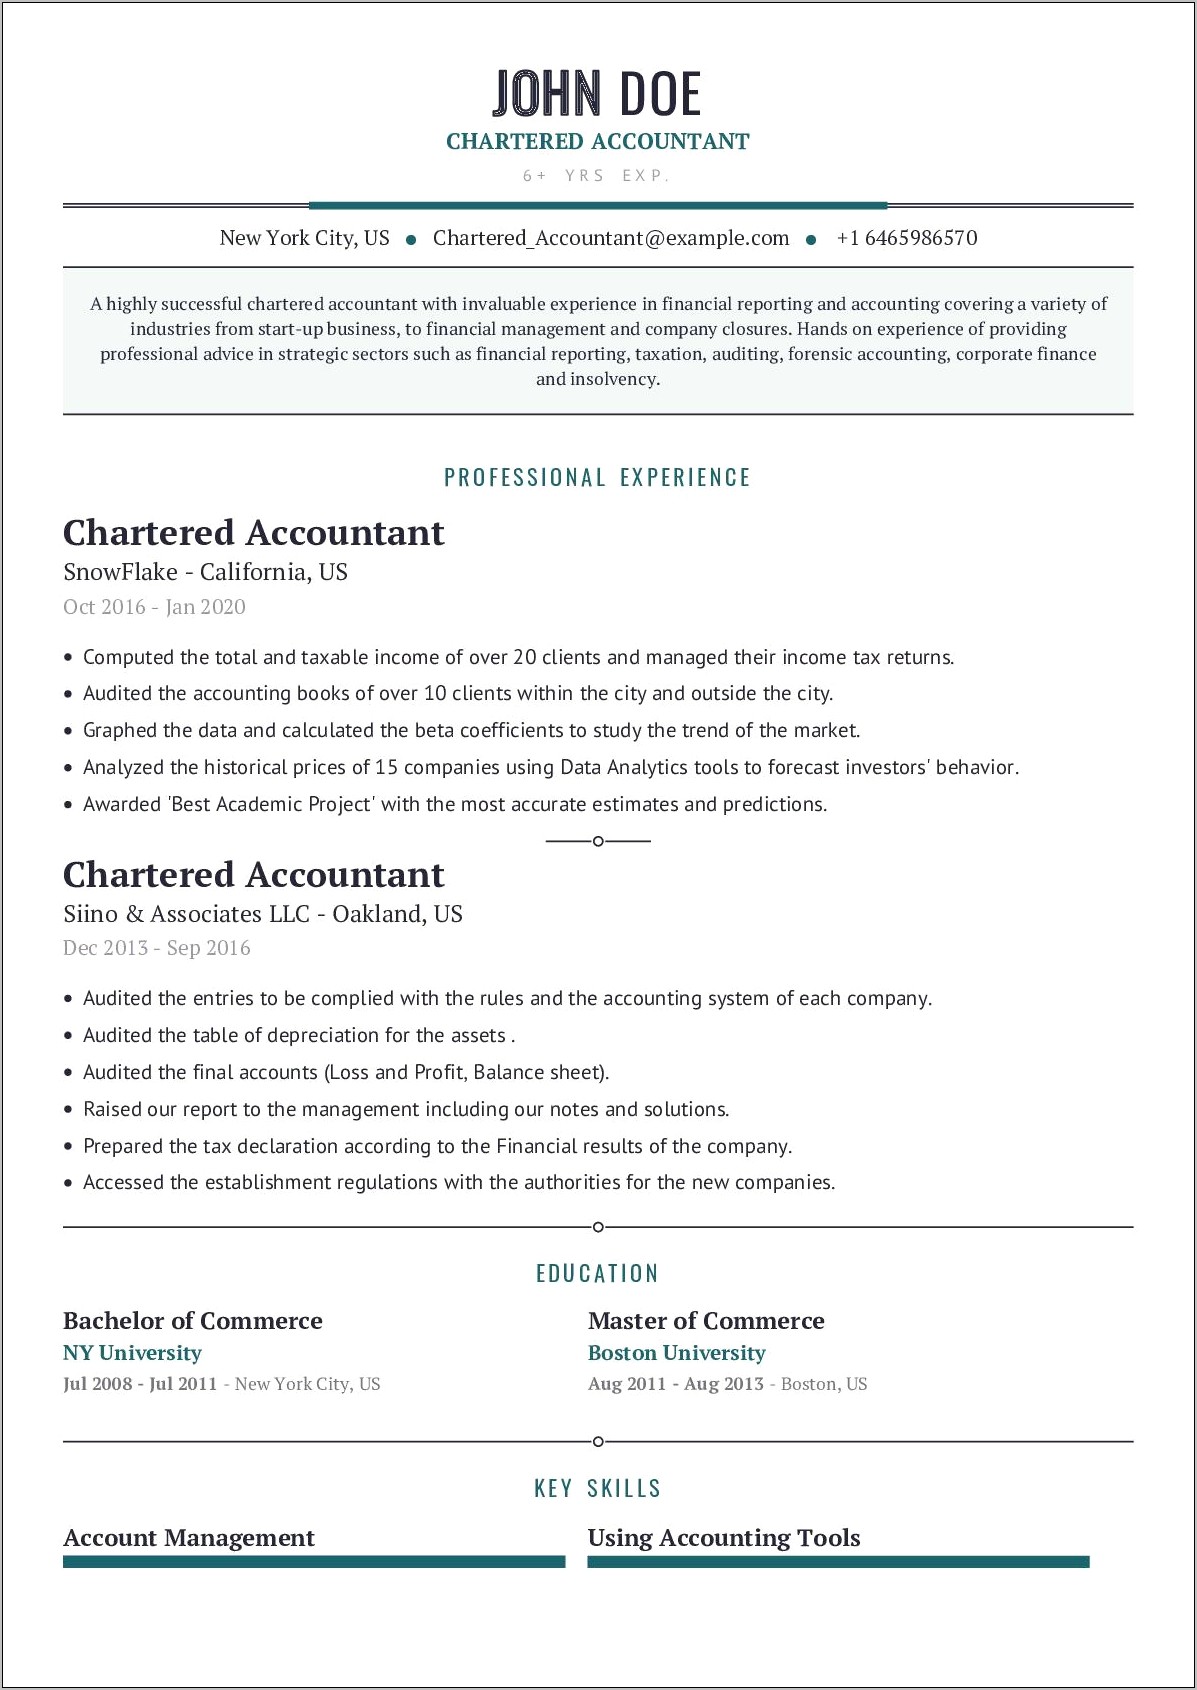 Key Skills And Abilities For Accountant On Resume